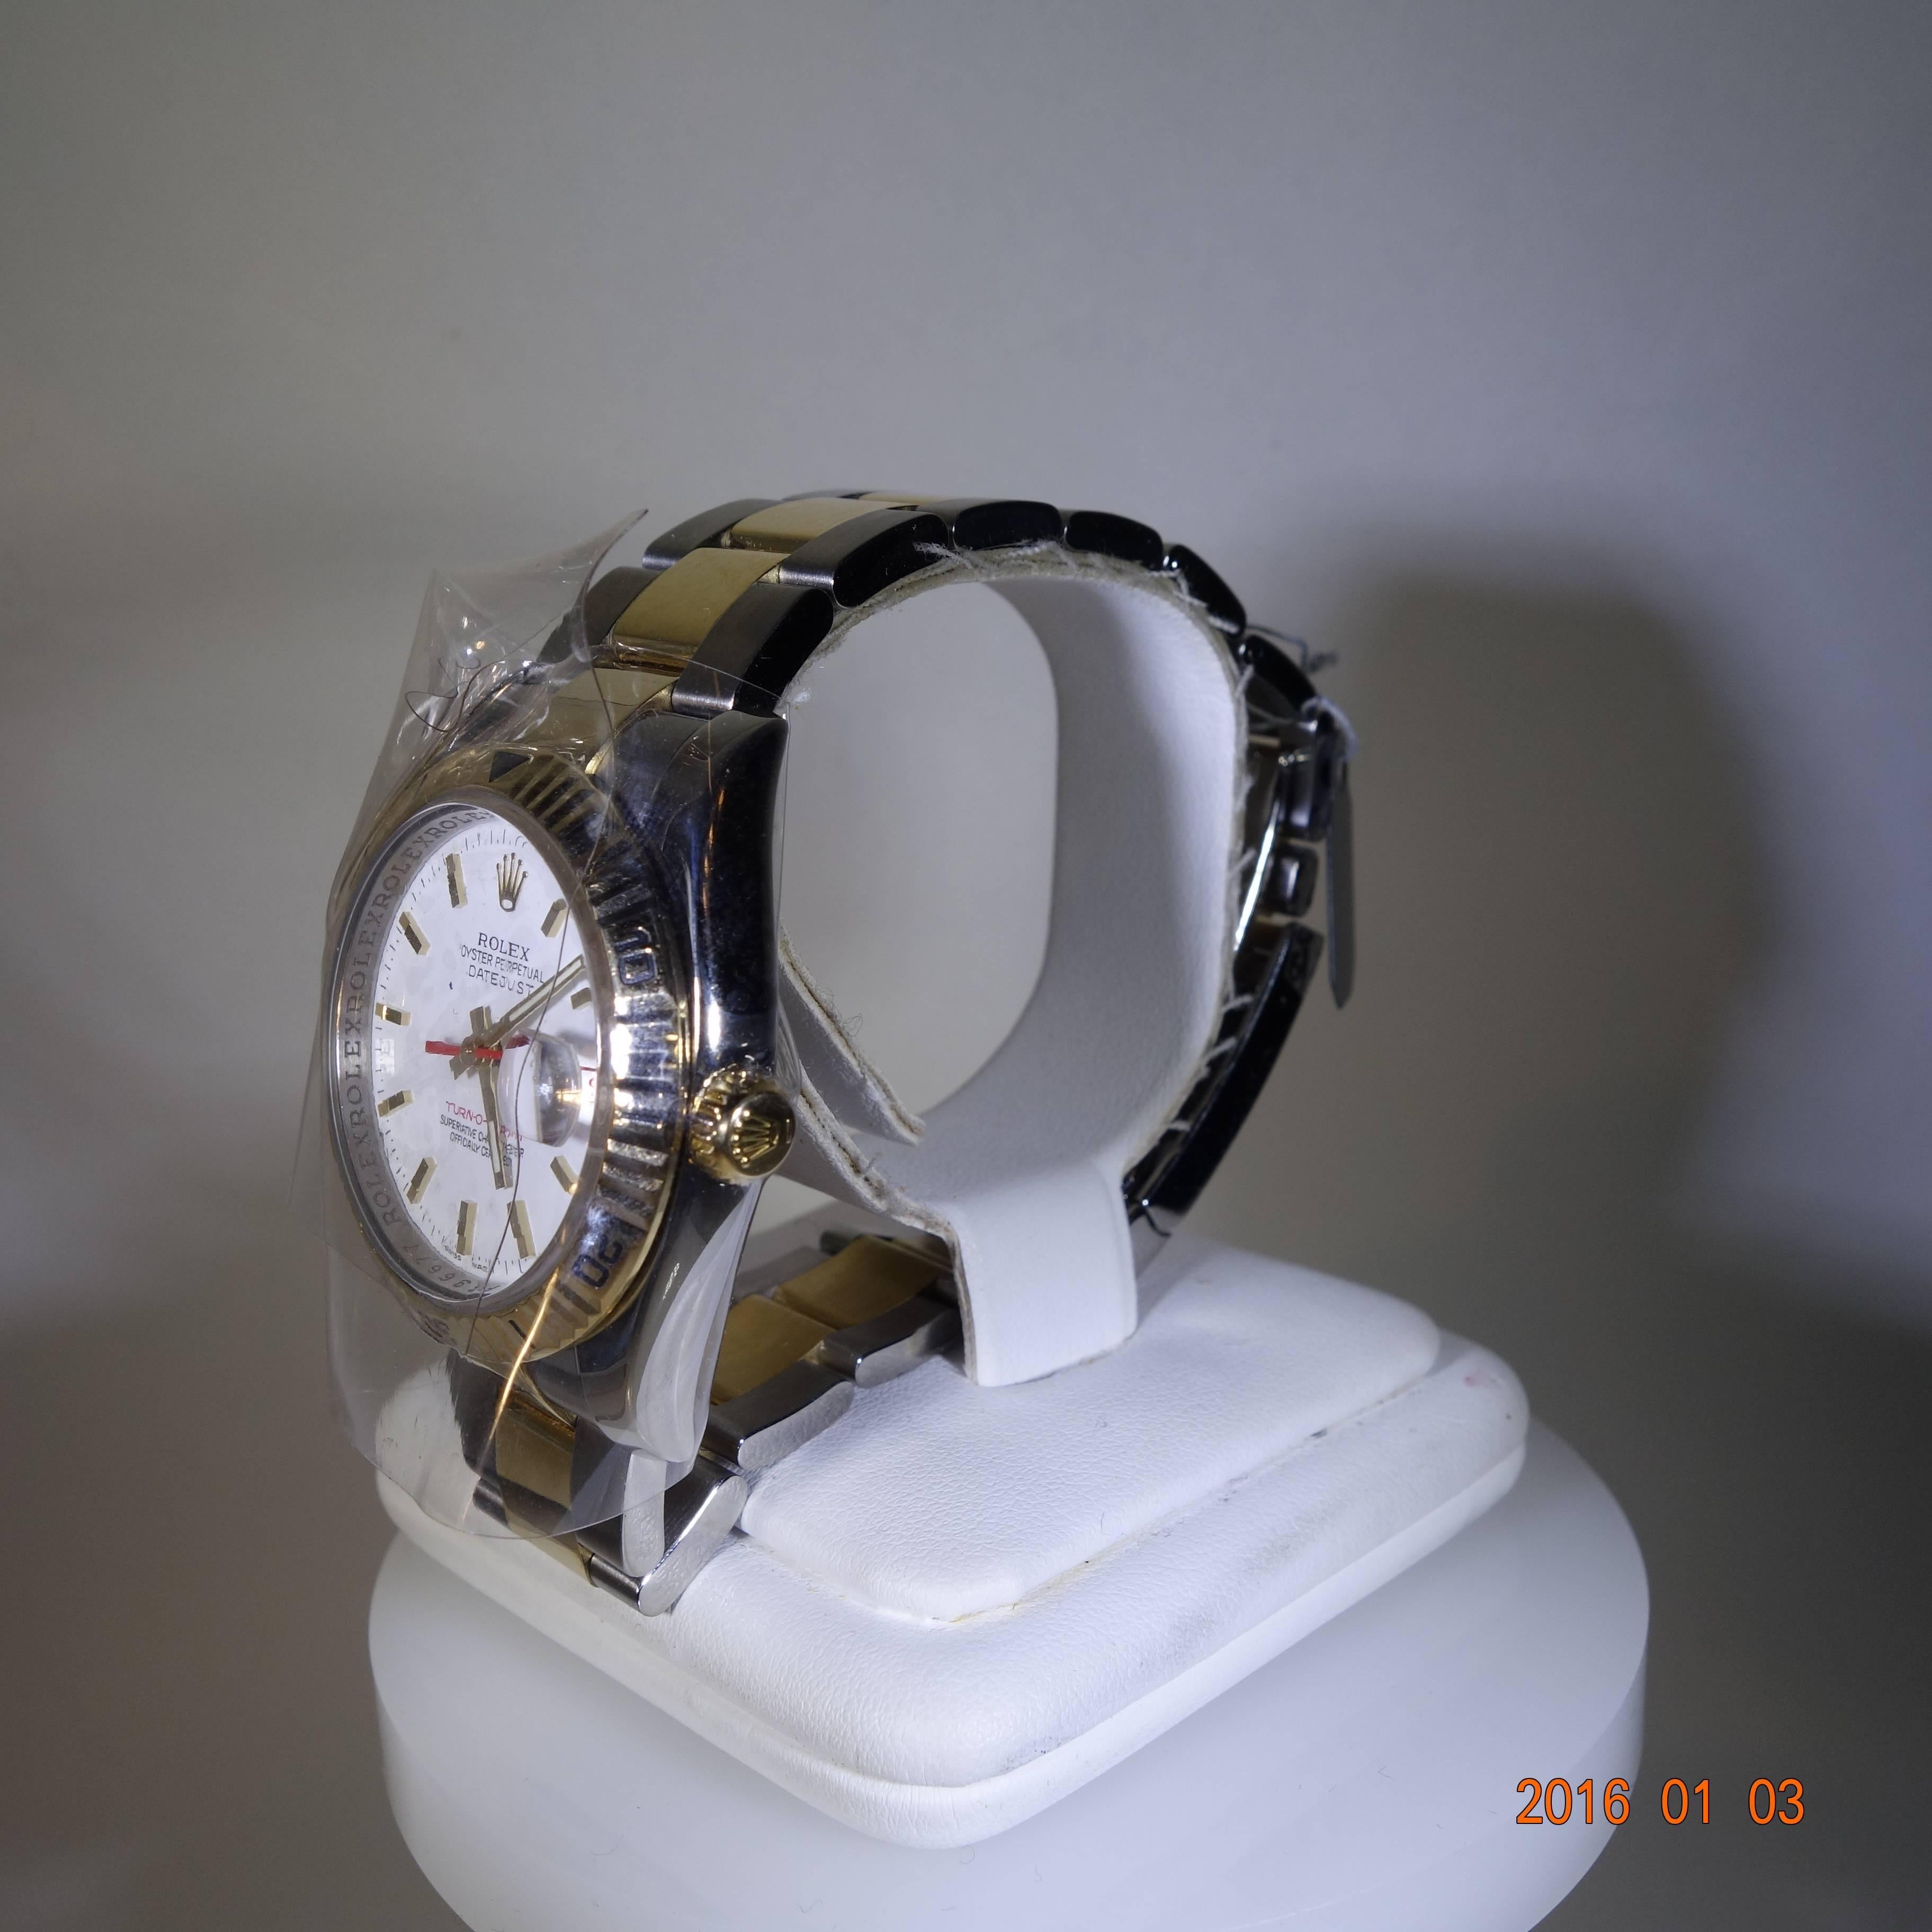 Ladies Tag Heuer Professional 200 meters.  This is a stainless steel 26 mm. circular face wrist watch with original Mother of Pearl crystal, a water resistant case and a screw down down and a quick-set date adjustment.  Retail price $2050.00